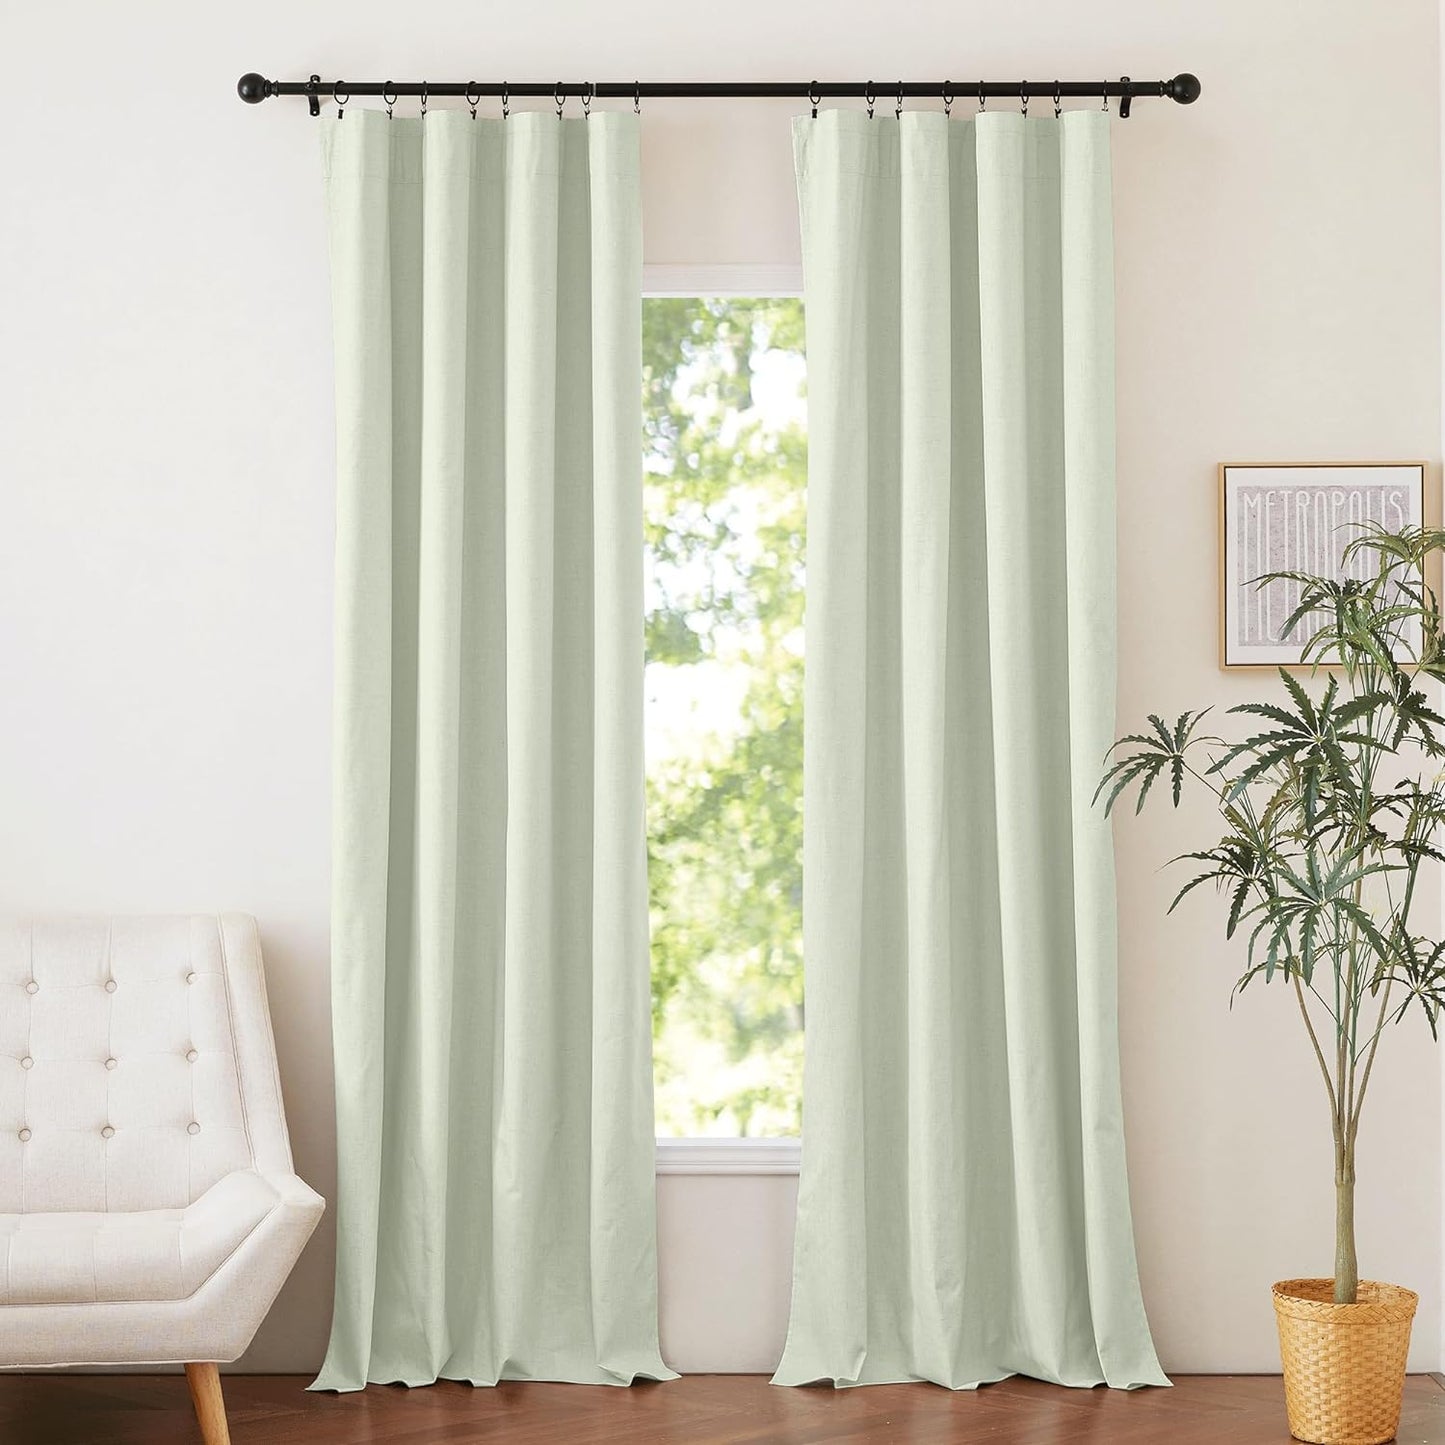 NICETOWN 100% Blackout Natural Linen Bedroom Curtains 52" Width by 95" Length 2 Panels with Thermal Insulated Liners, Farmhouse Style Keep Warm Dual Rod Pocket Window Draperies for Living Room  NICETOWN Sage Green W52 X L90 